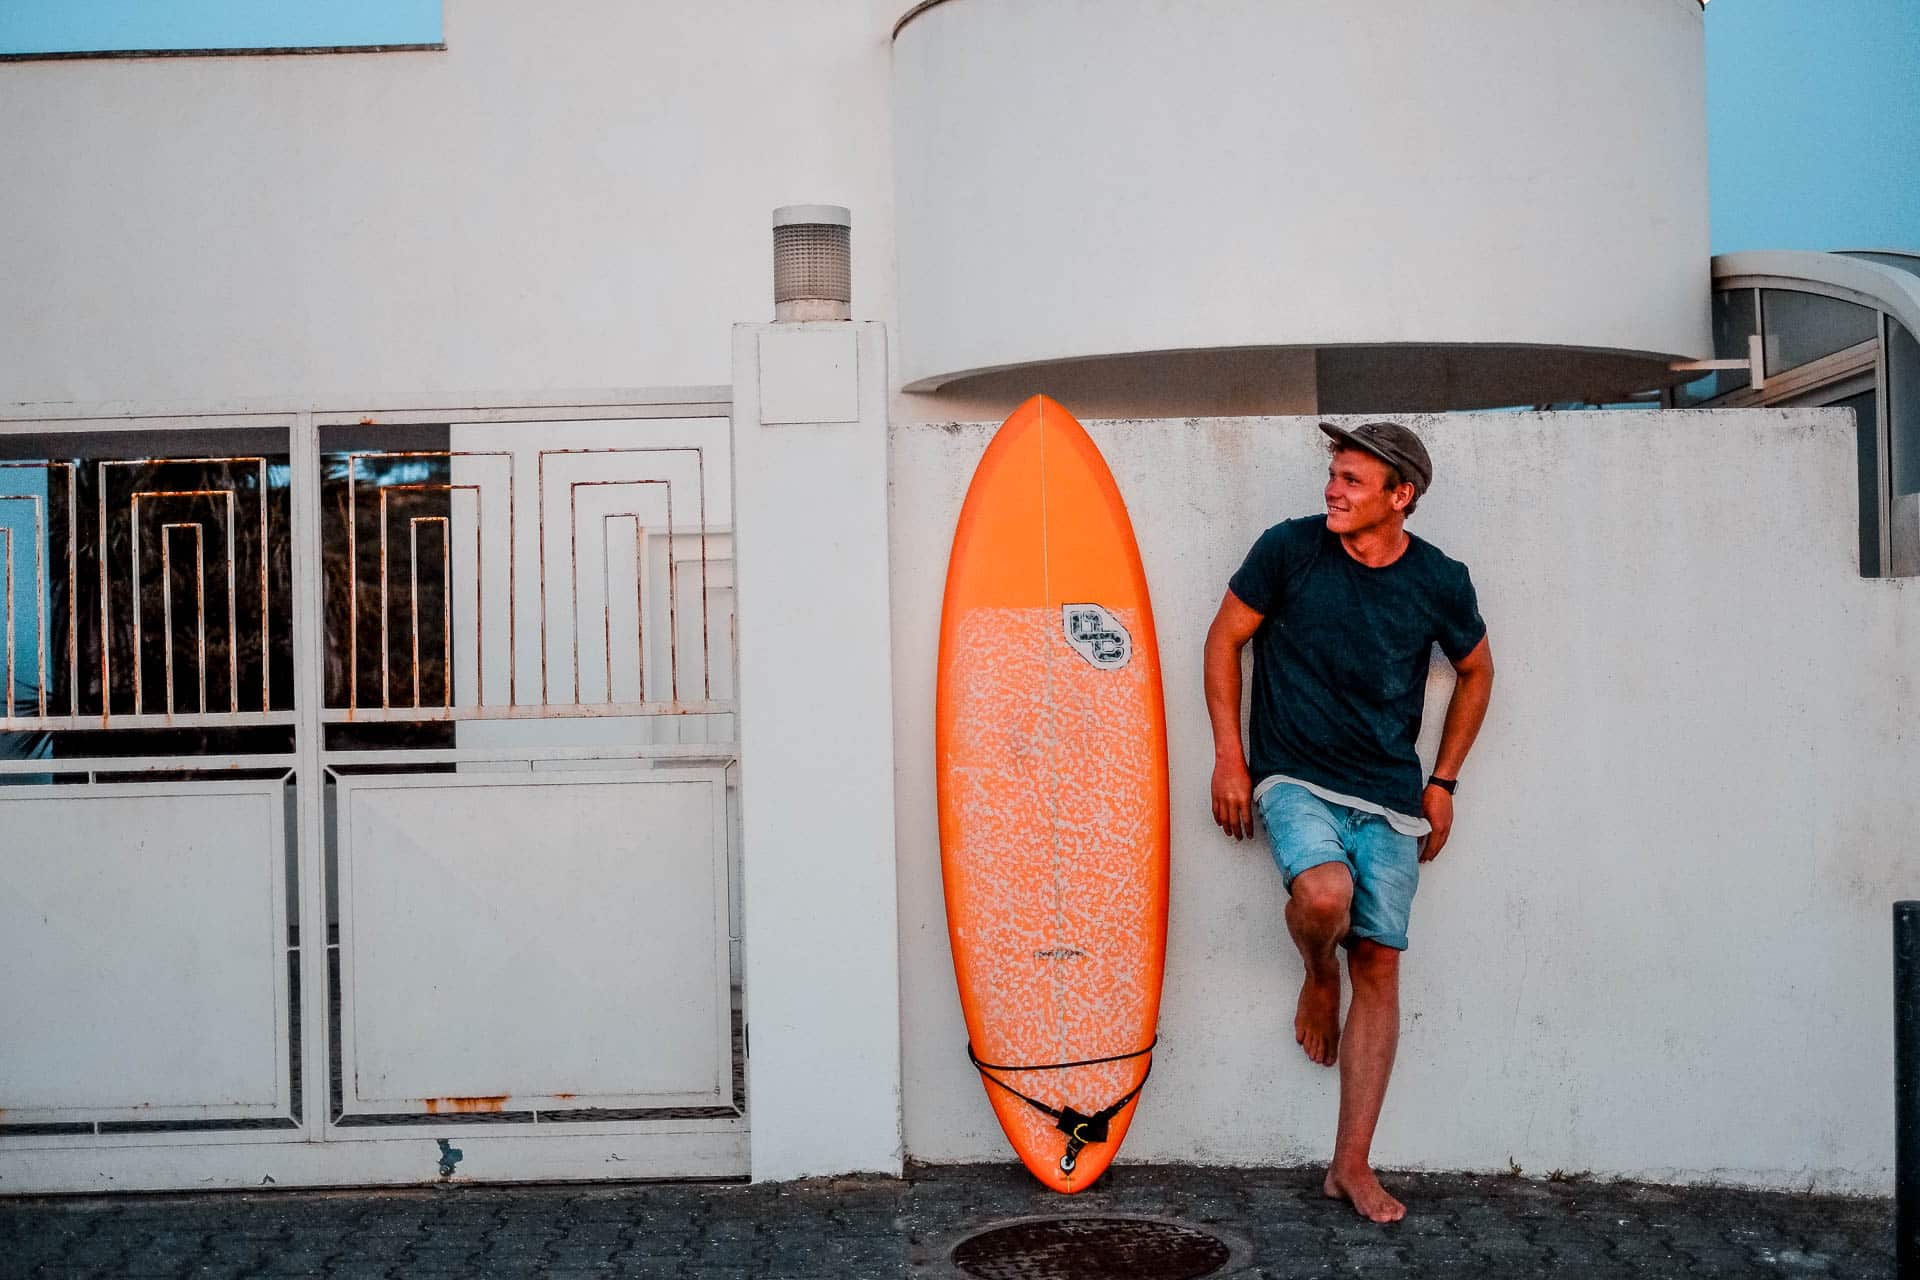 A person leaning against the wall posing with an orange surfboard.